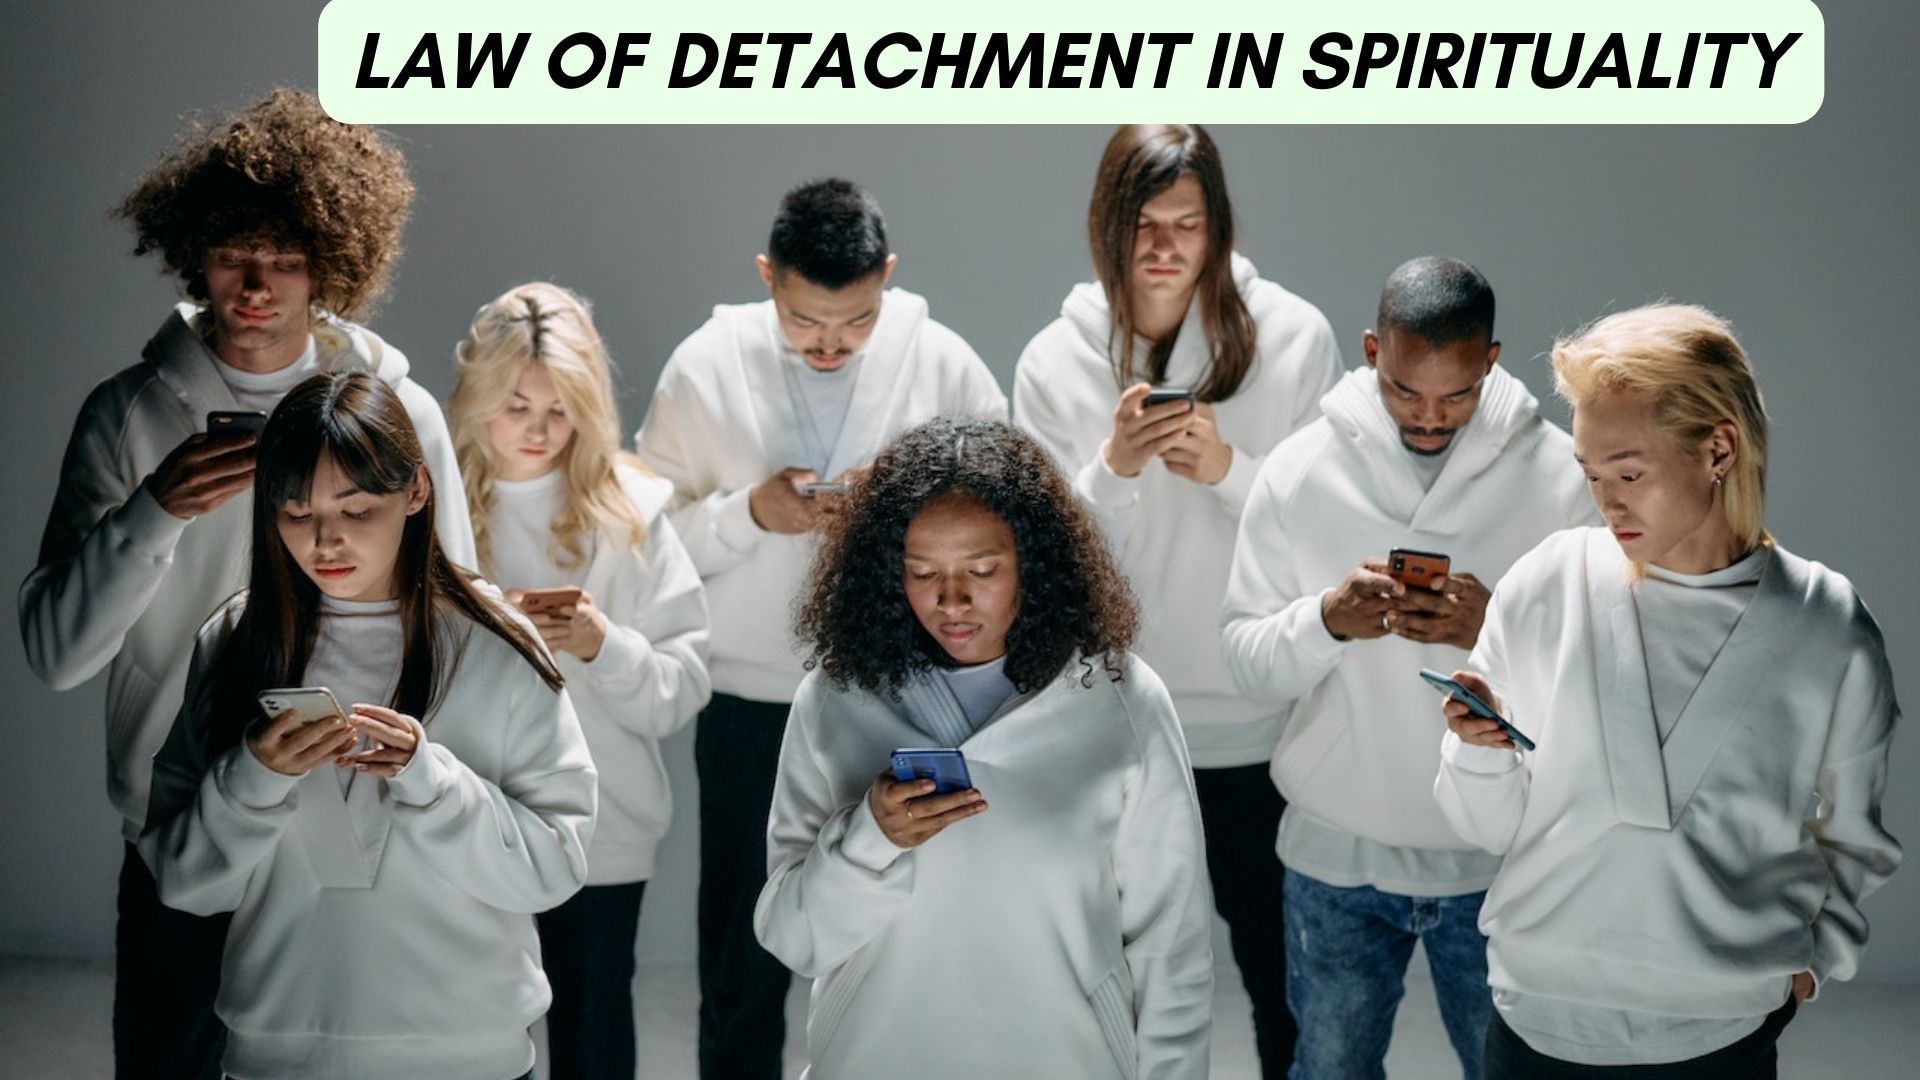 Law Of Detachment - How Detachment Can Increase Your Happiness